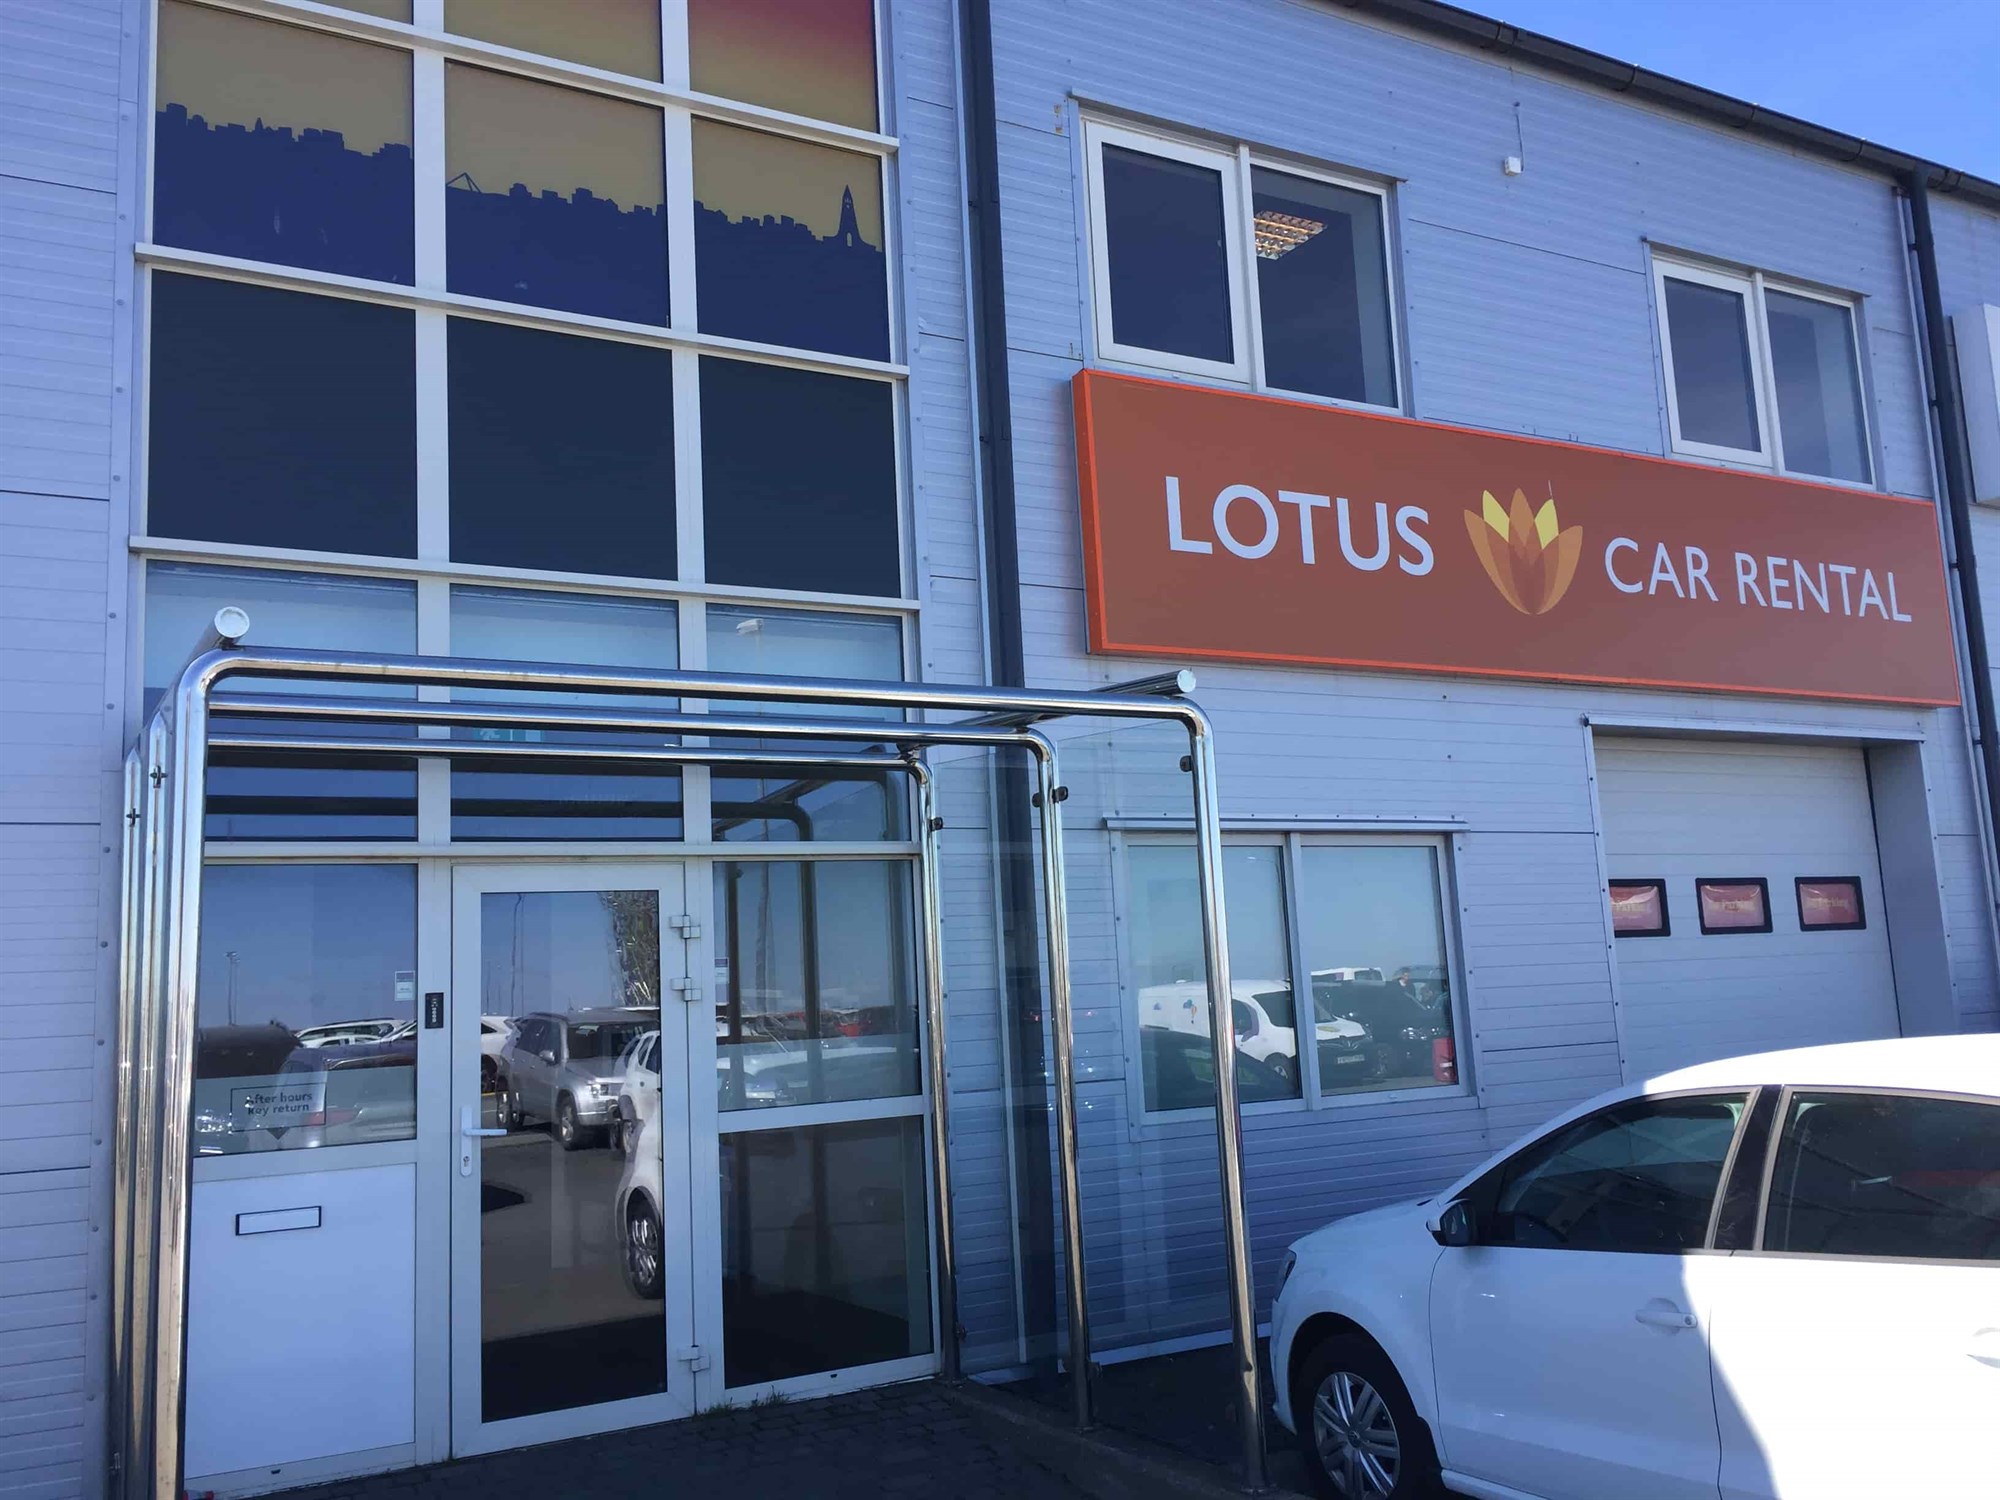 lotus car rental office from outside